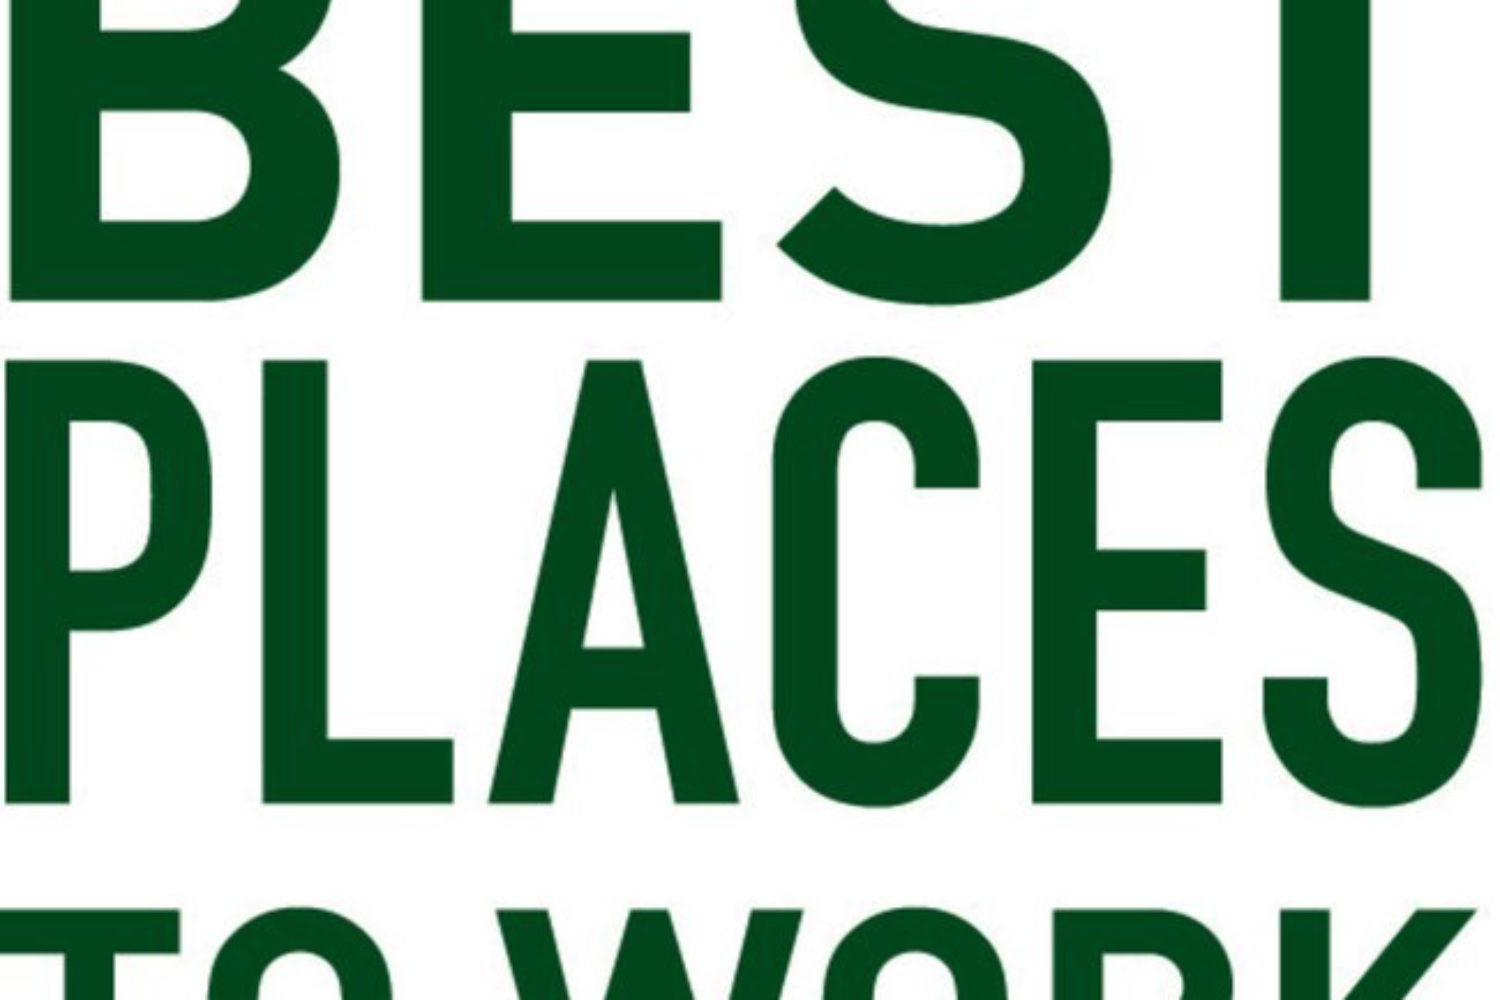 P&I 2018 Survey Again Ranks National as one of the “Best Places to Work